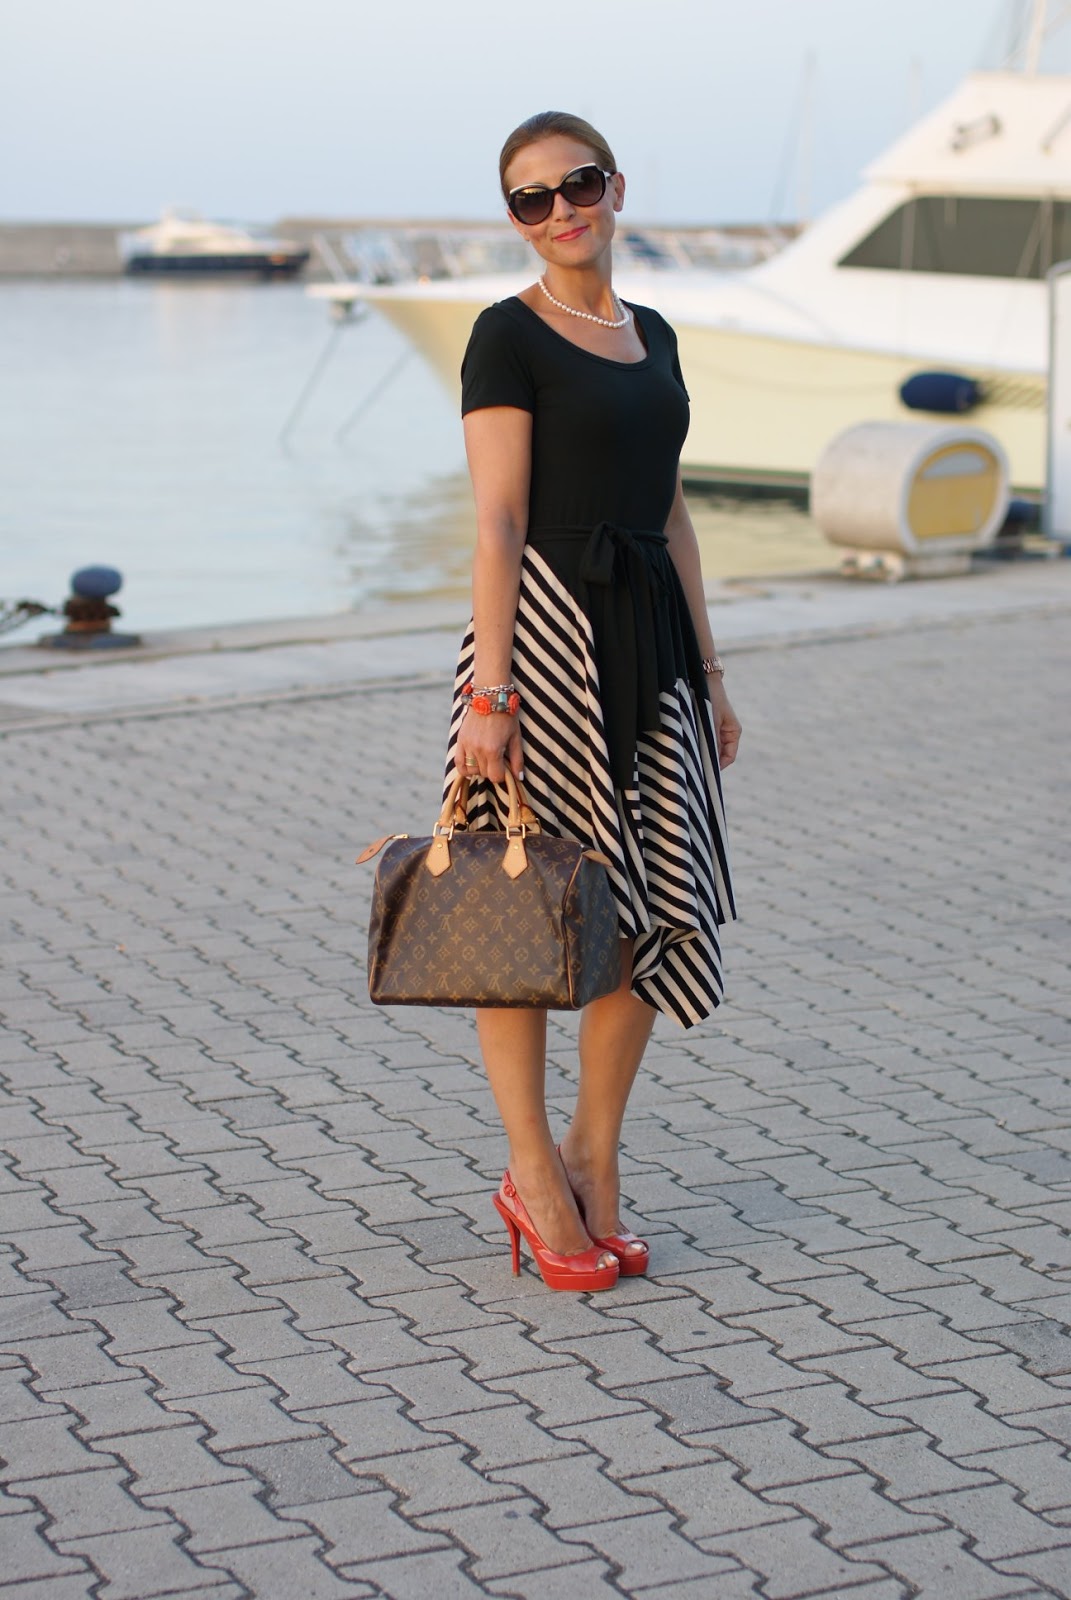 Asymmetrical striped dress | Fashion and Cookies - fashion and beauty blog